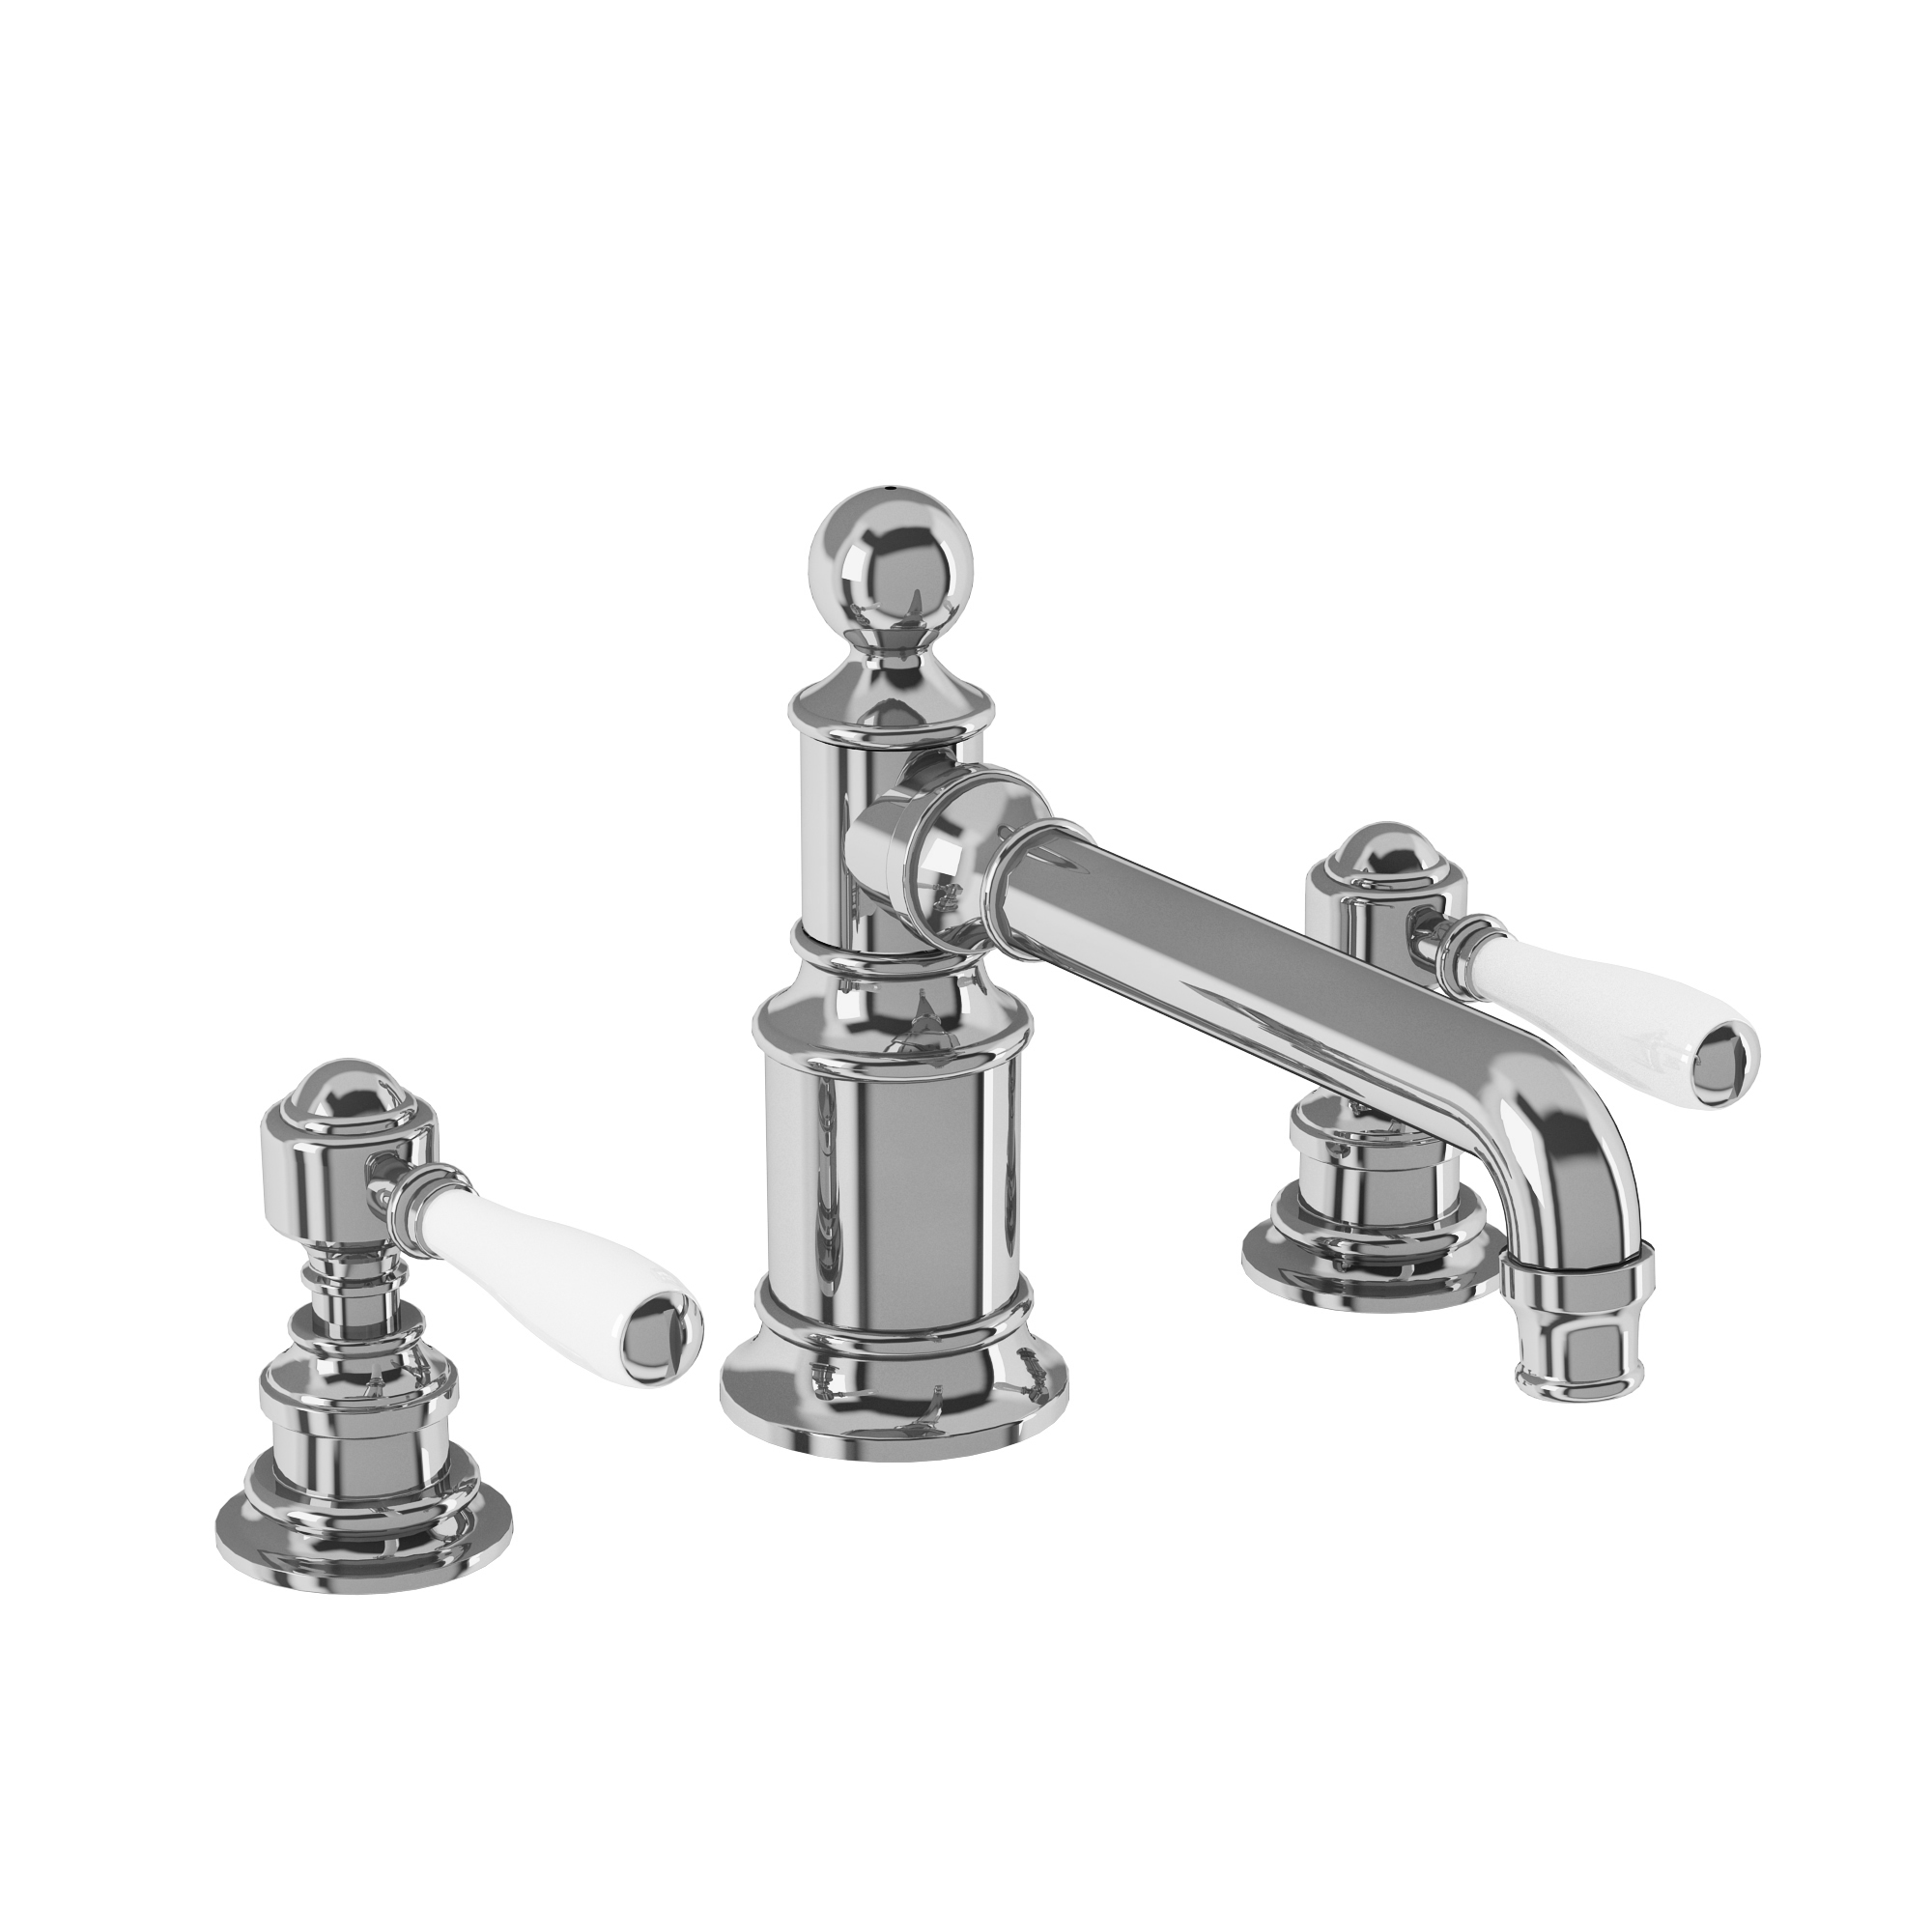 Arcade Three hole basin mixer deck-mounted without pop up waste - chrome - with ceramic lever